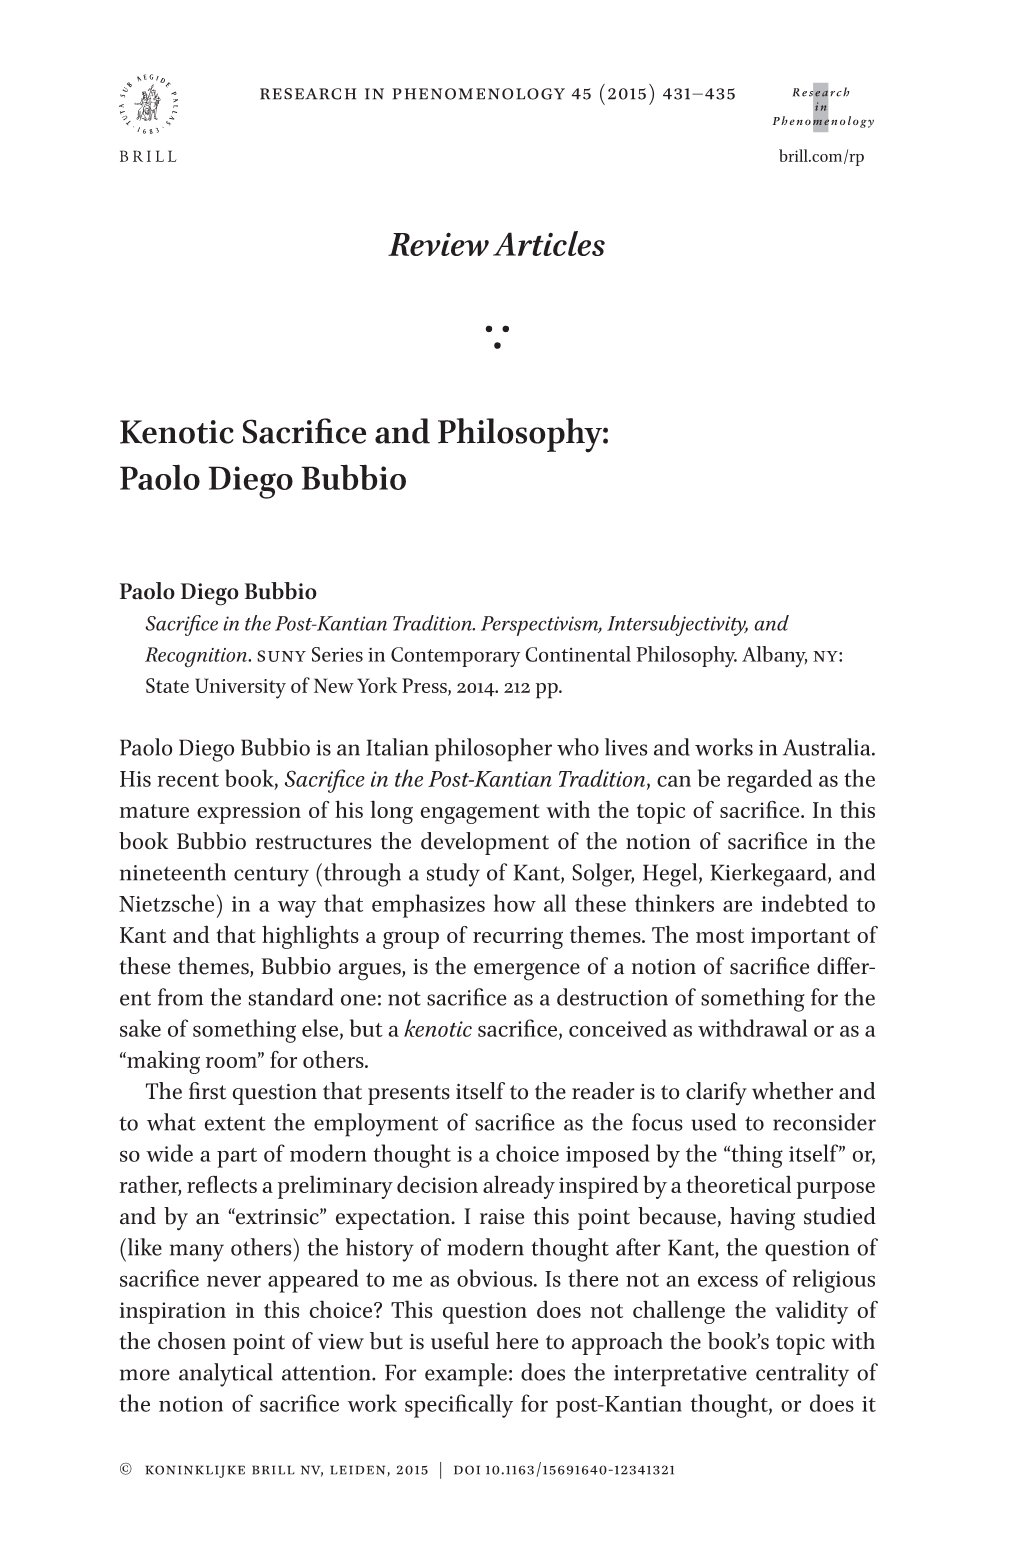 Review Articles Kenotic Sacrifice and Philosophy: Paolo Diego Bubbio